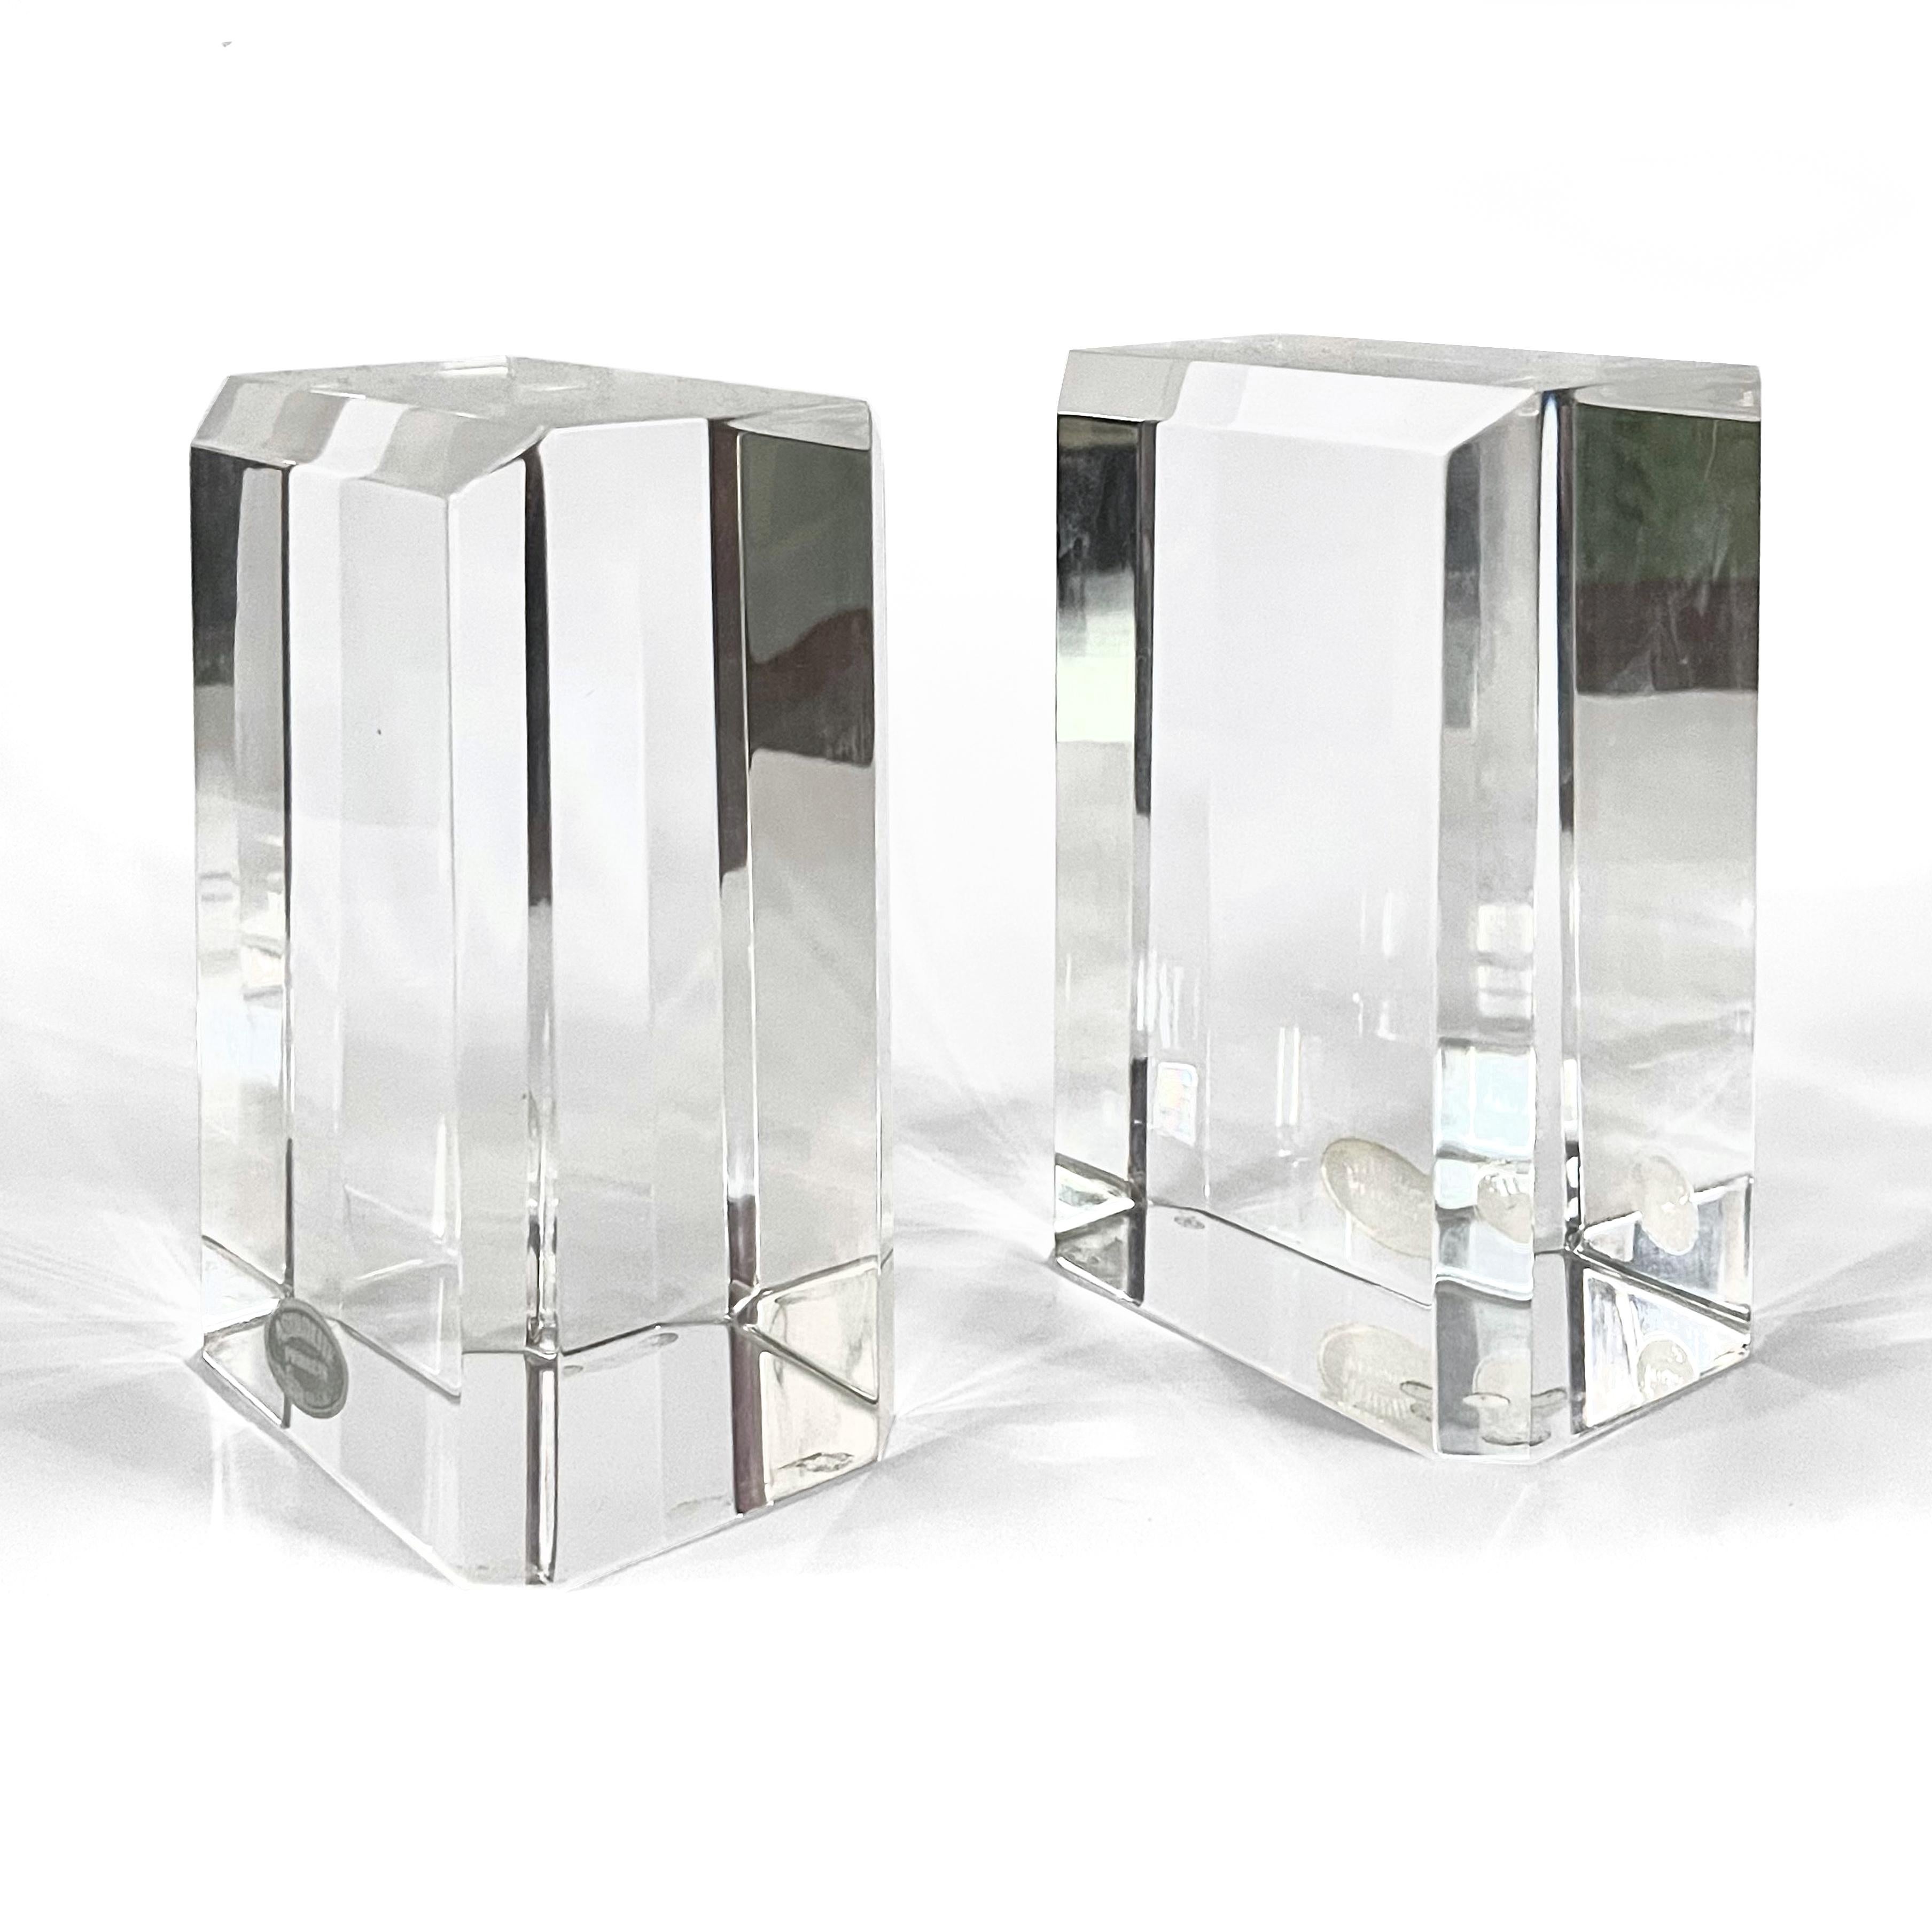 This beautiful pair of thick faceted lucite bookends by Ritts is part of their 